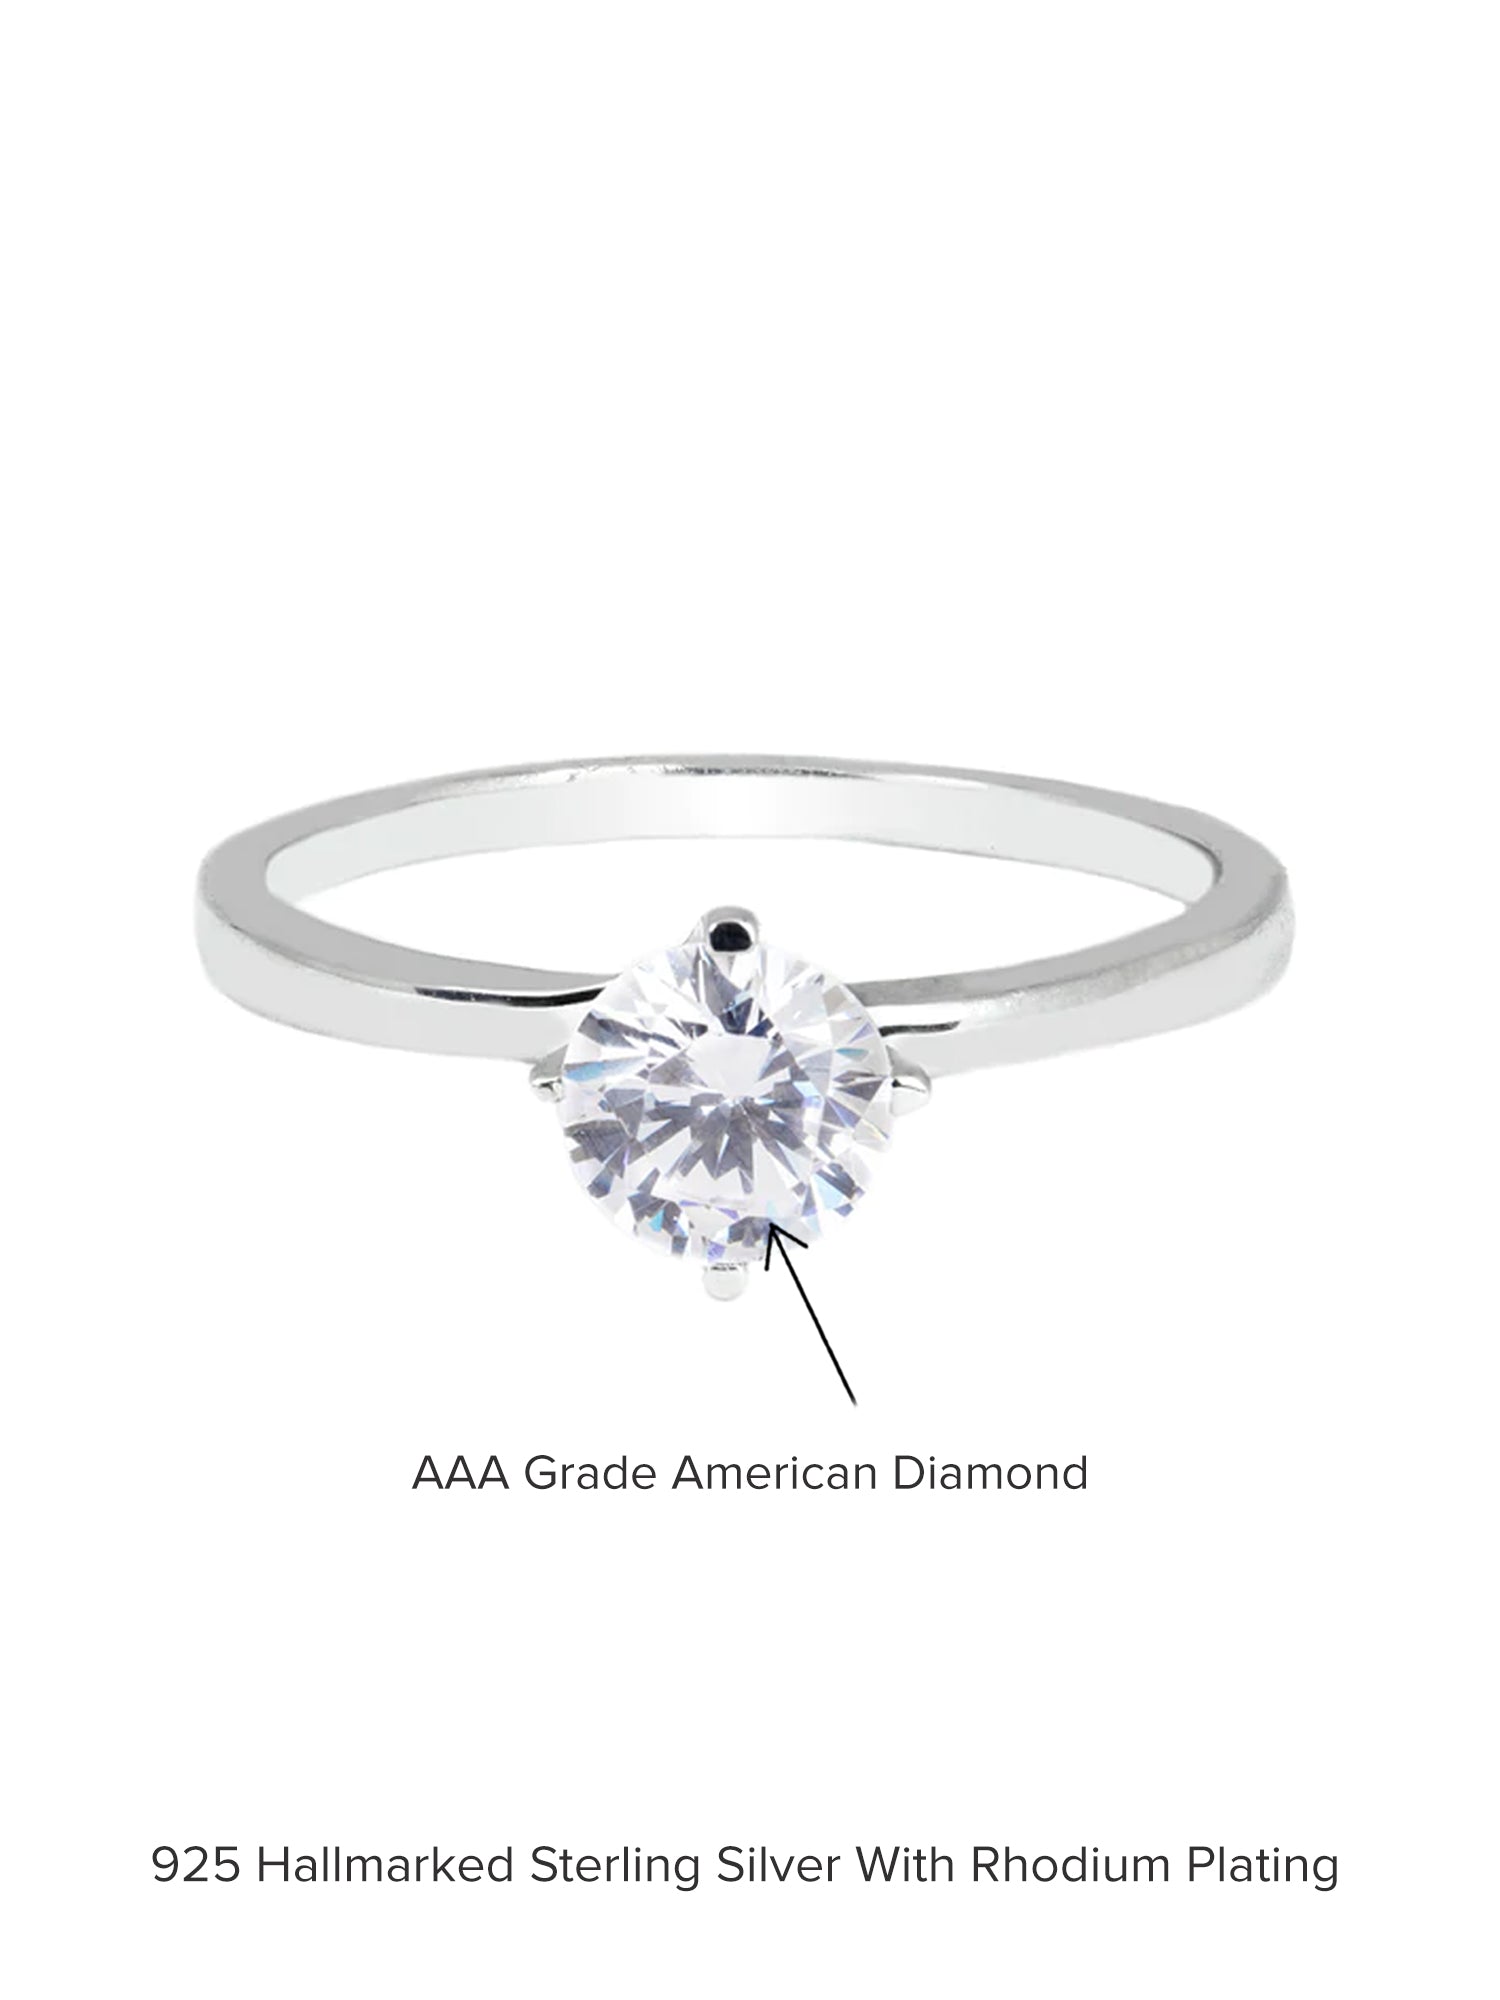 ROUND 1.5 CARAT SOLITAIRE RING FOR WOMEN-6